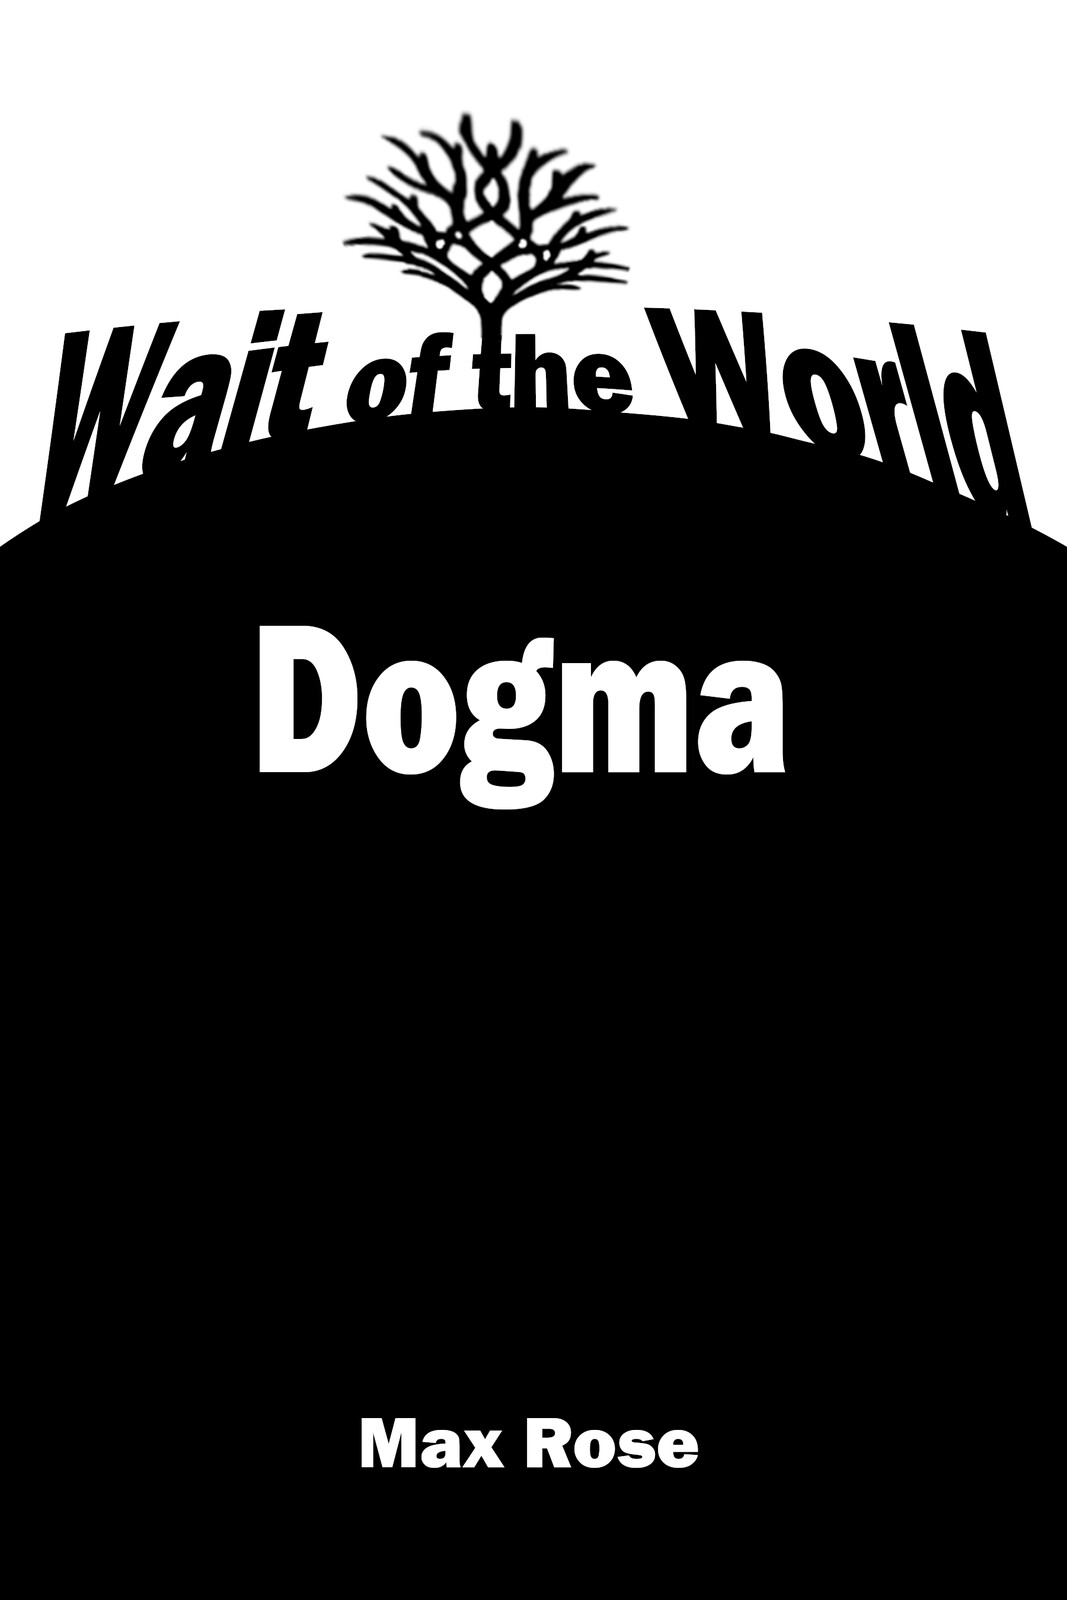 The first version of the WotW:Dogma book cover